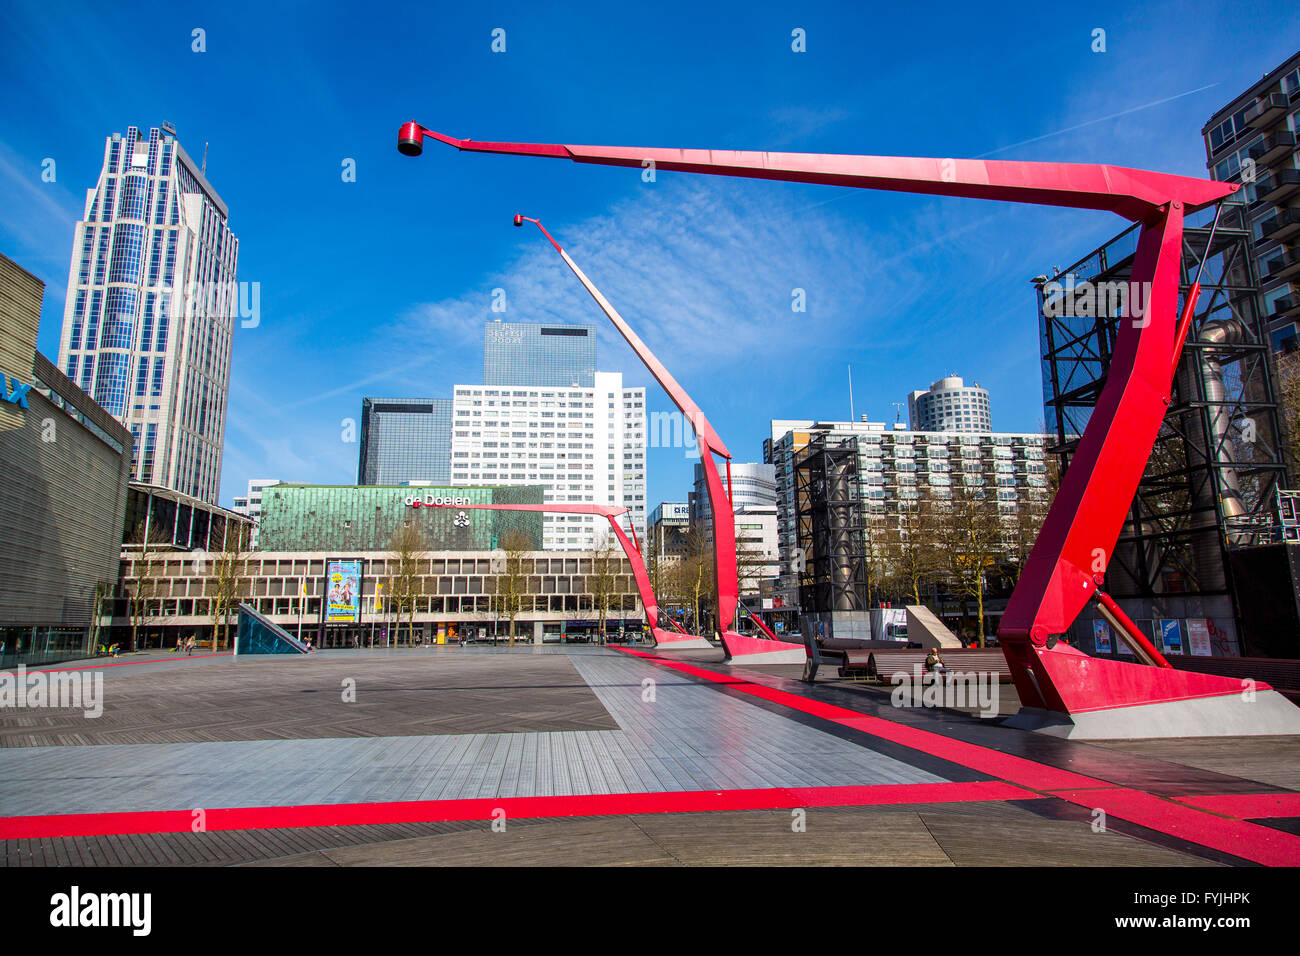 Downtown, Schouwburgplein, square in the city center, with various cultural institutions and art installations, Rotterdam Stock Photo